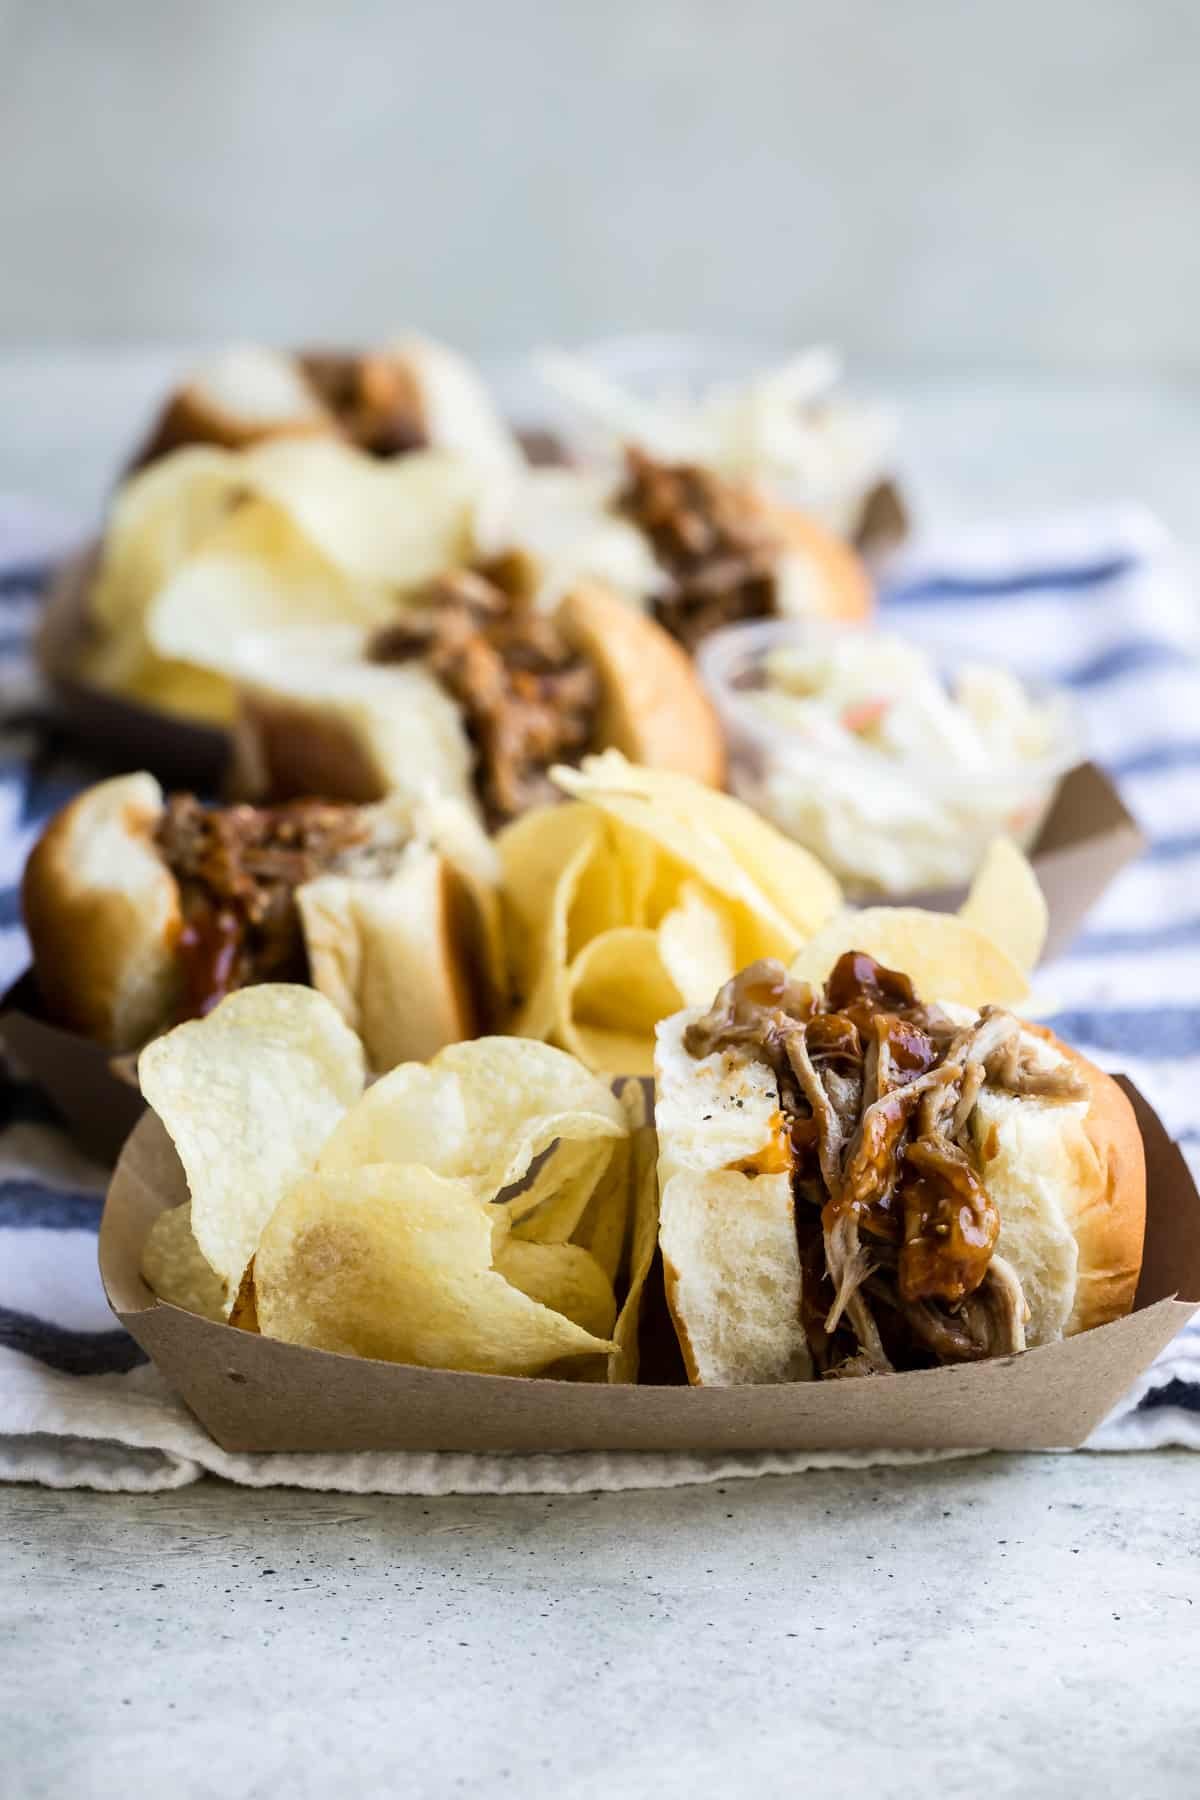 Slow cooker pulled pork sandwiches in brown food boats.